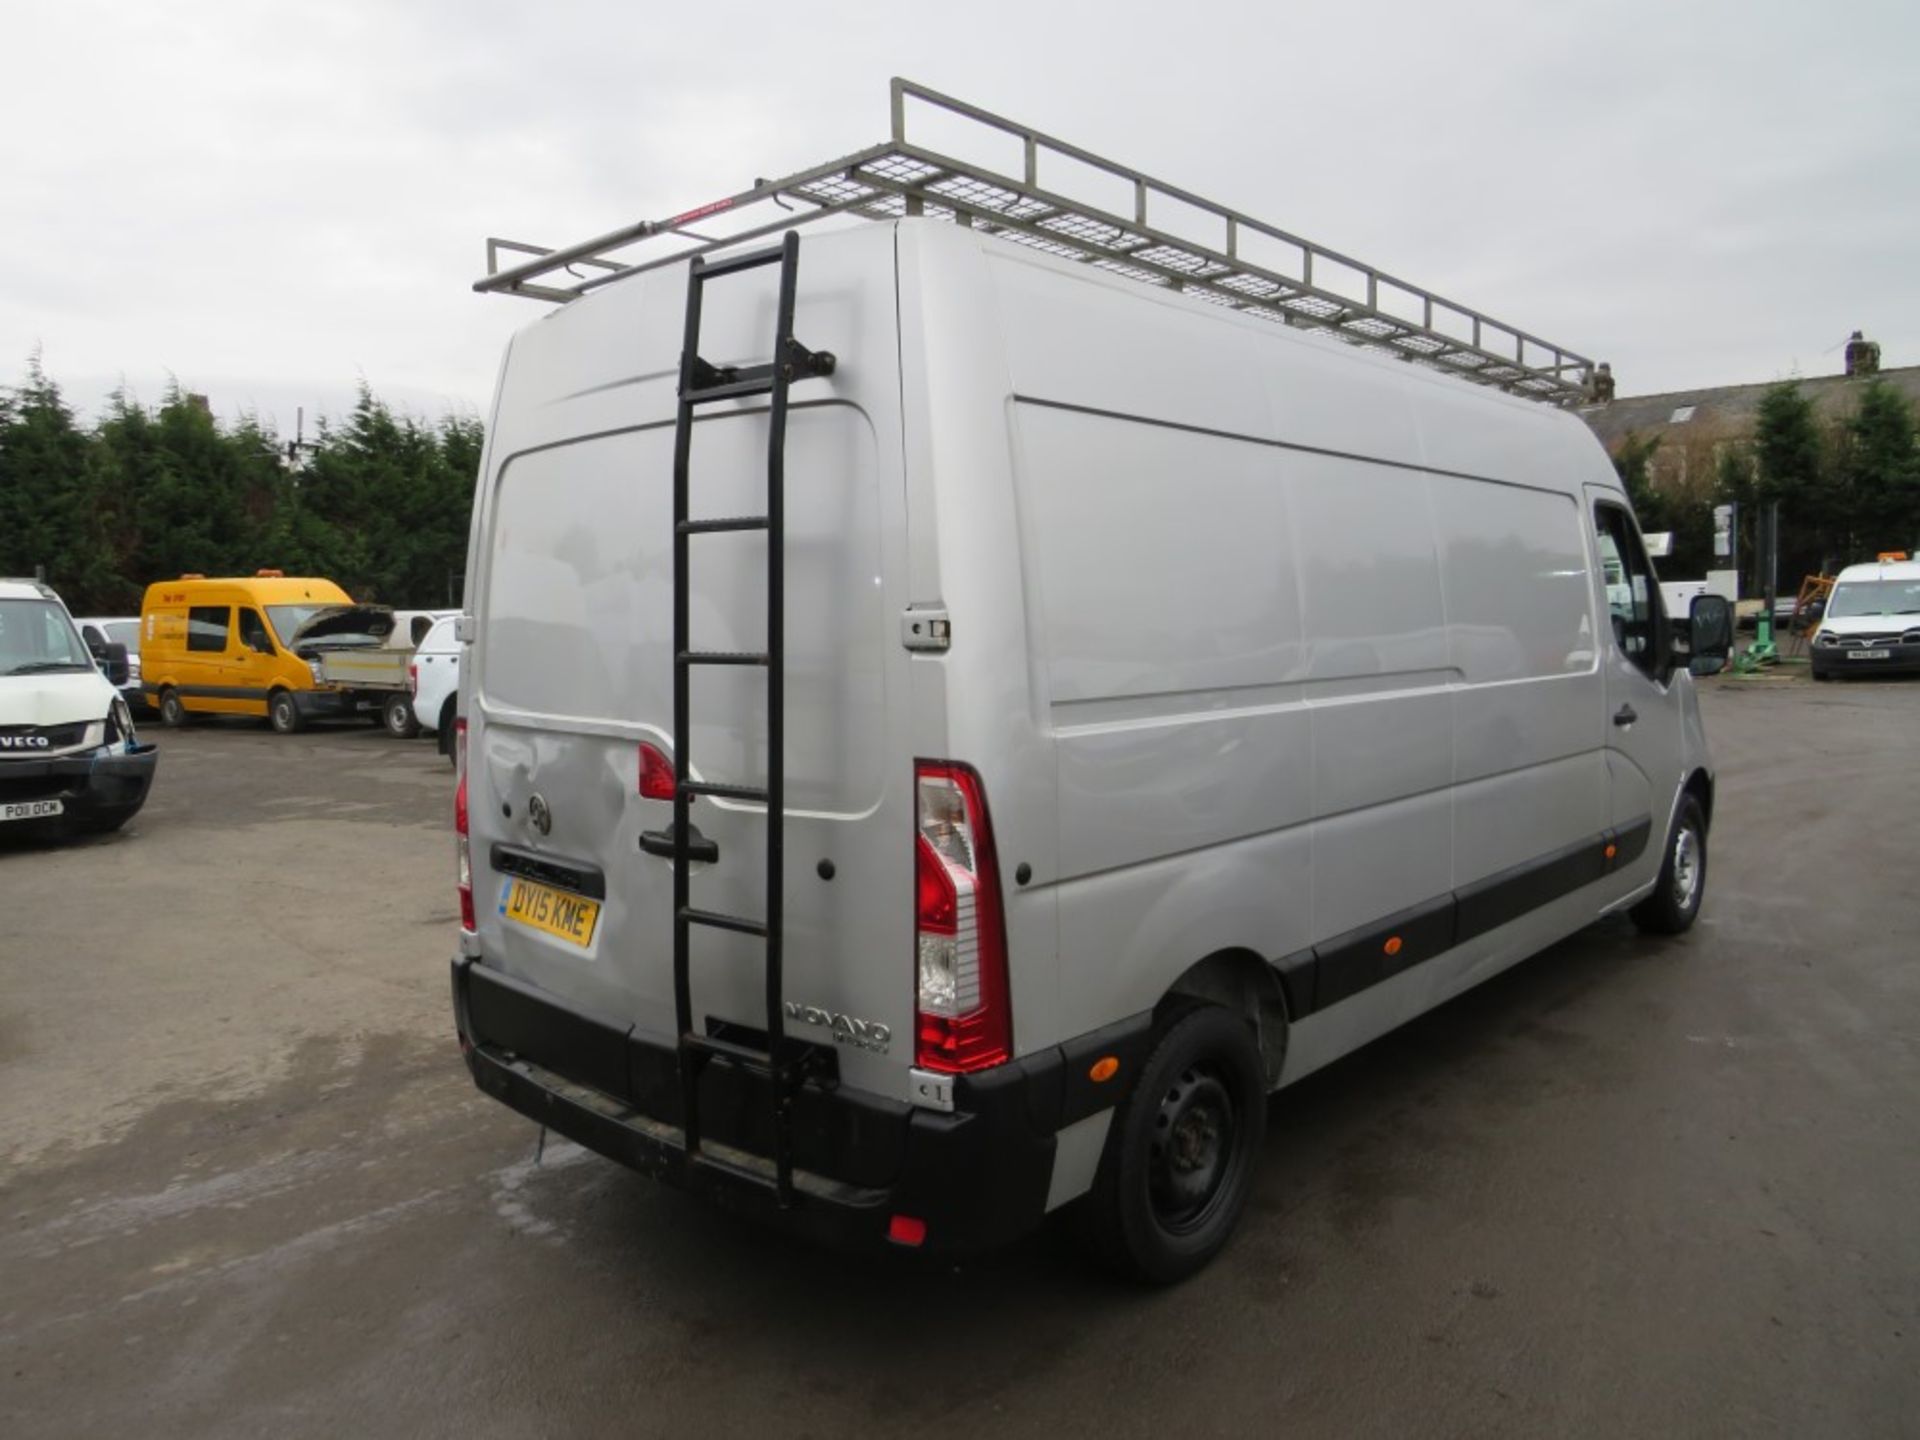 15 reg VAUXHALL MOVANO F3500 CDTI, 1ST REG 05/15, TEST 05/20, 129952M WARRANTED, V5 HERE, 1 OWNER - Image 4 of 6